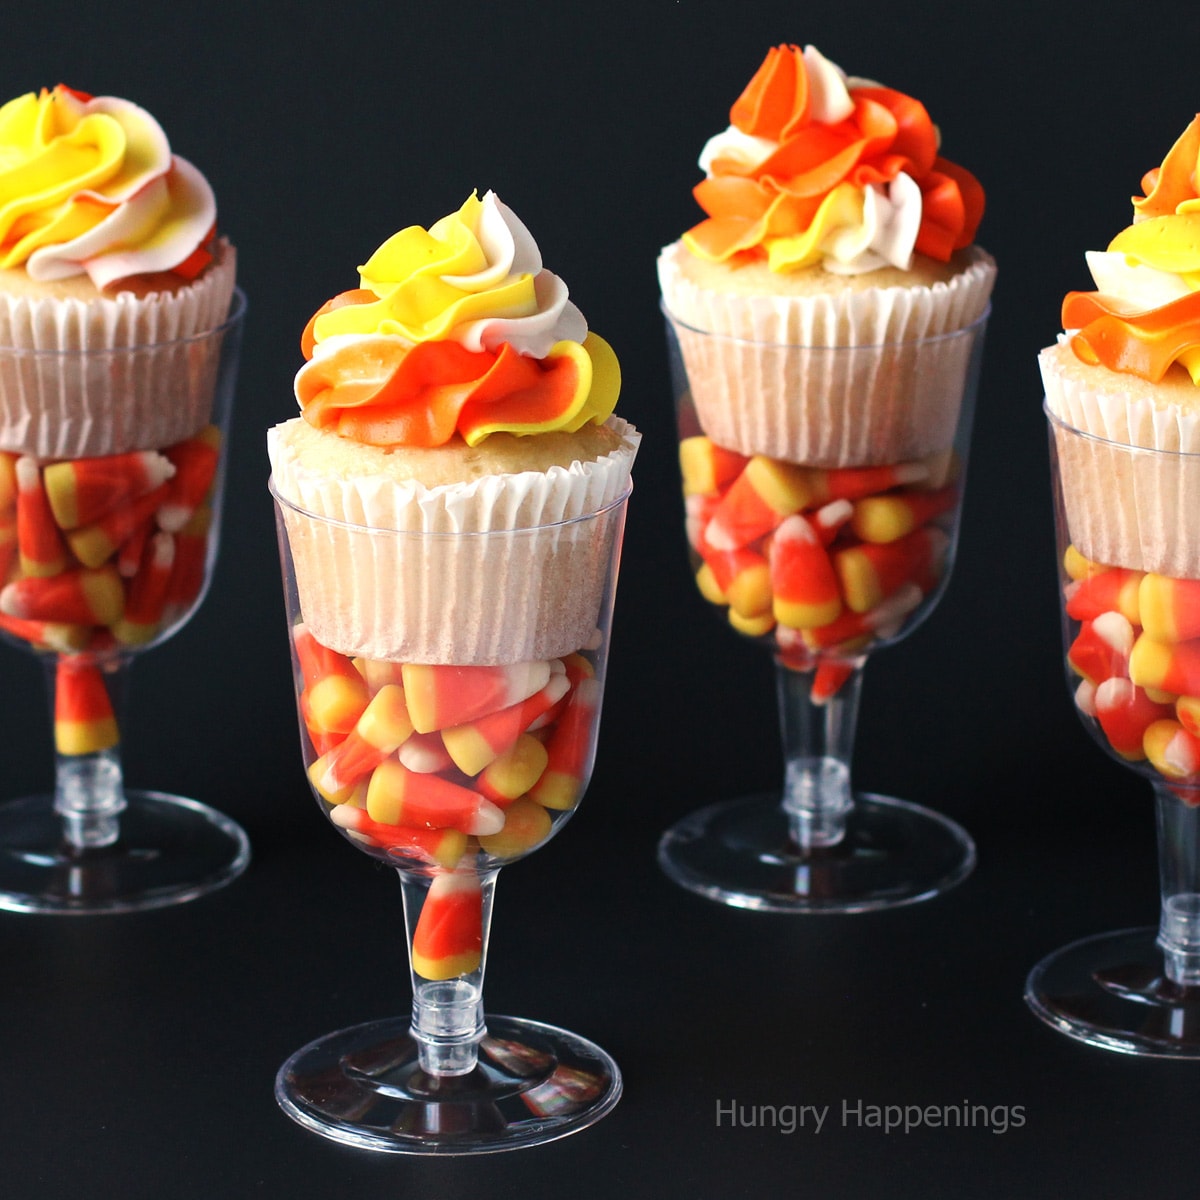 candy corn cupcakes in wine glasses filled with candy corn.